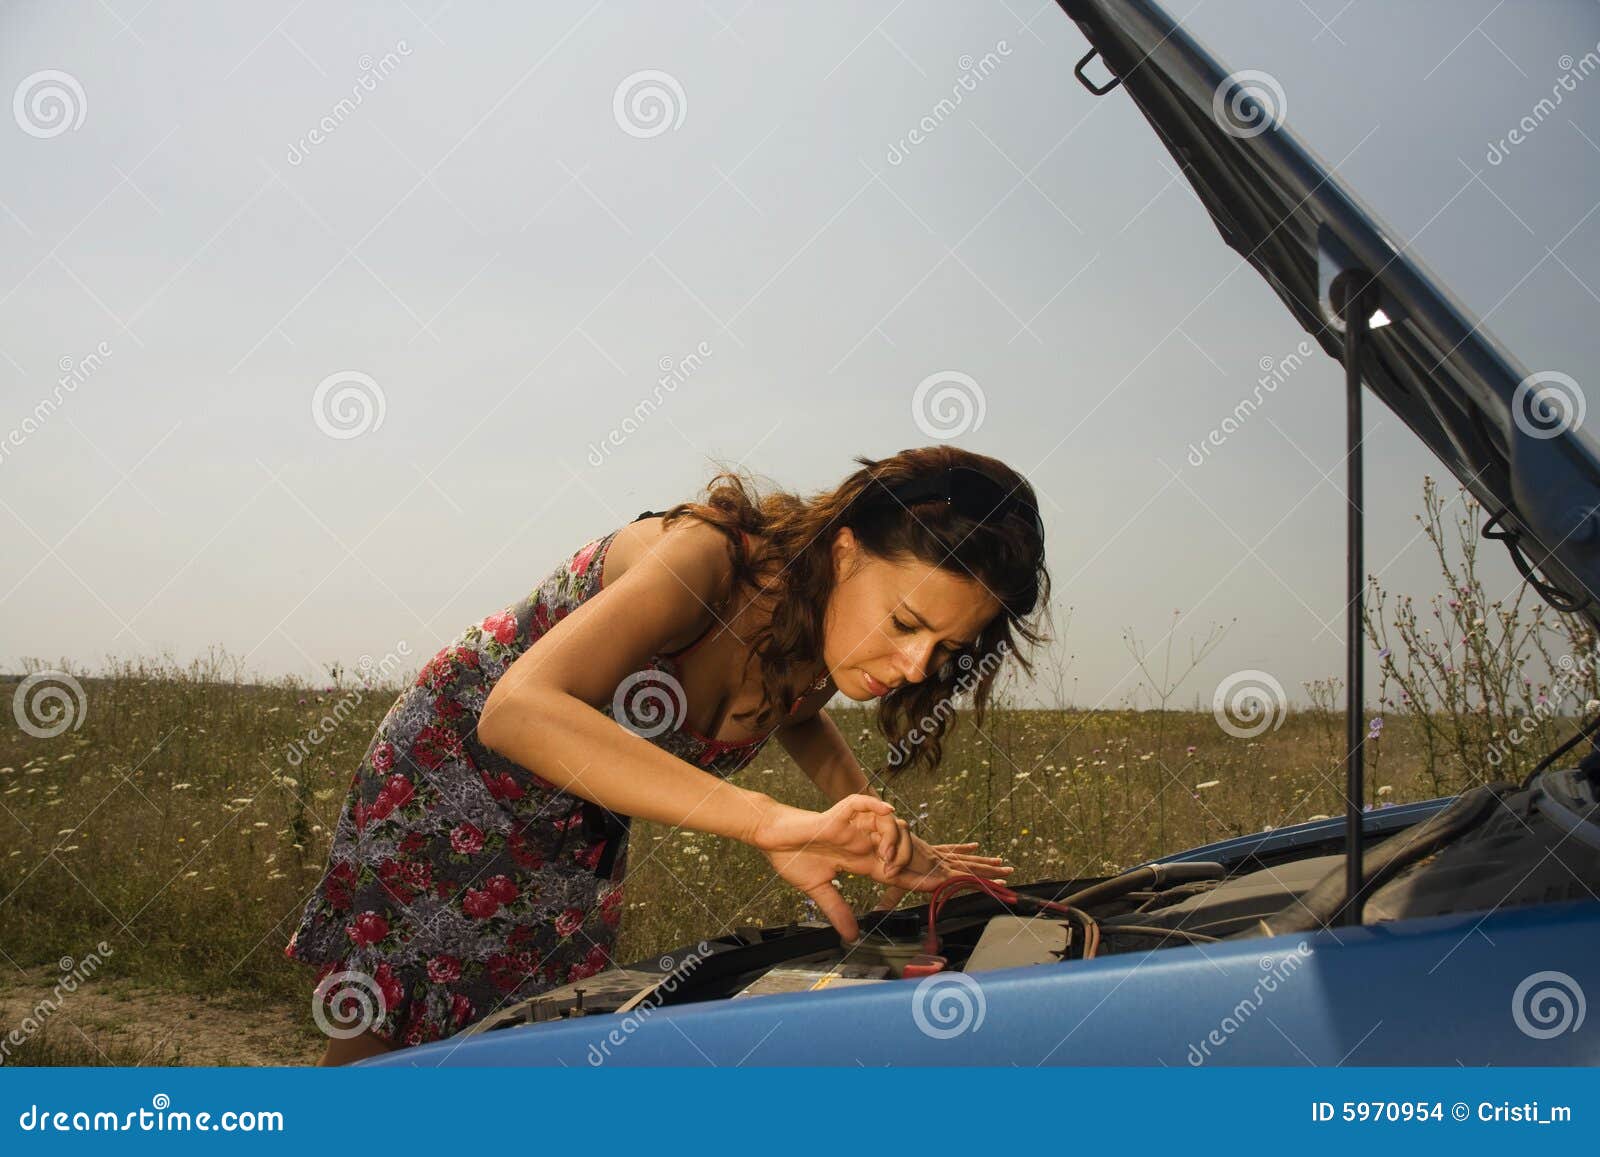 Young Woman Bent Over Engine Stock Images Image 5970954 